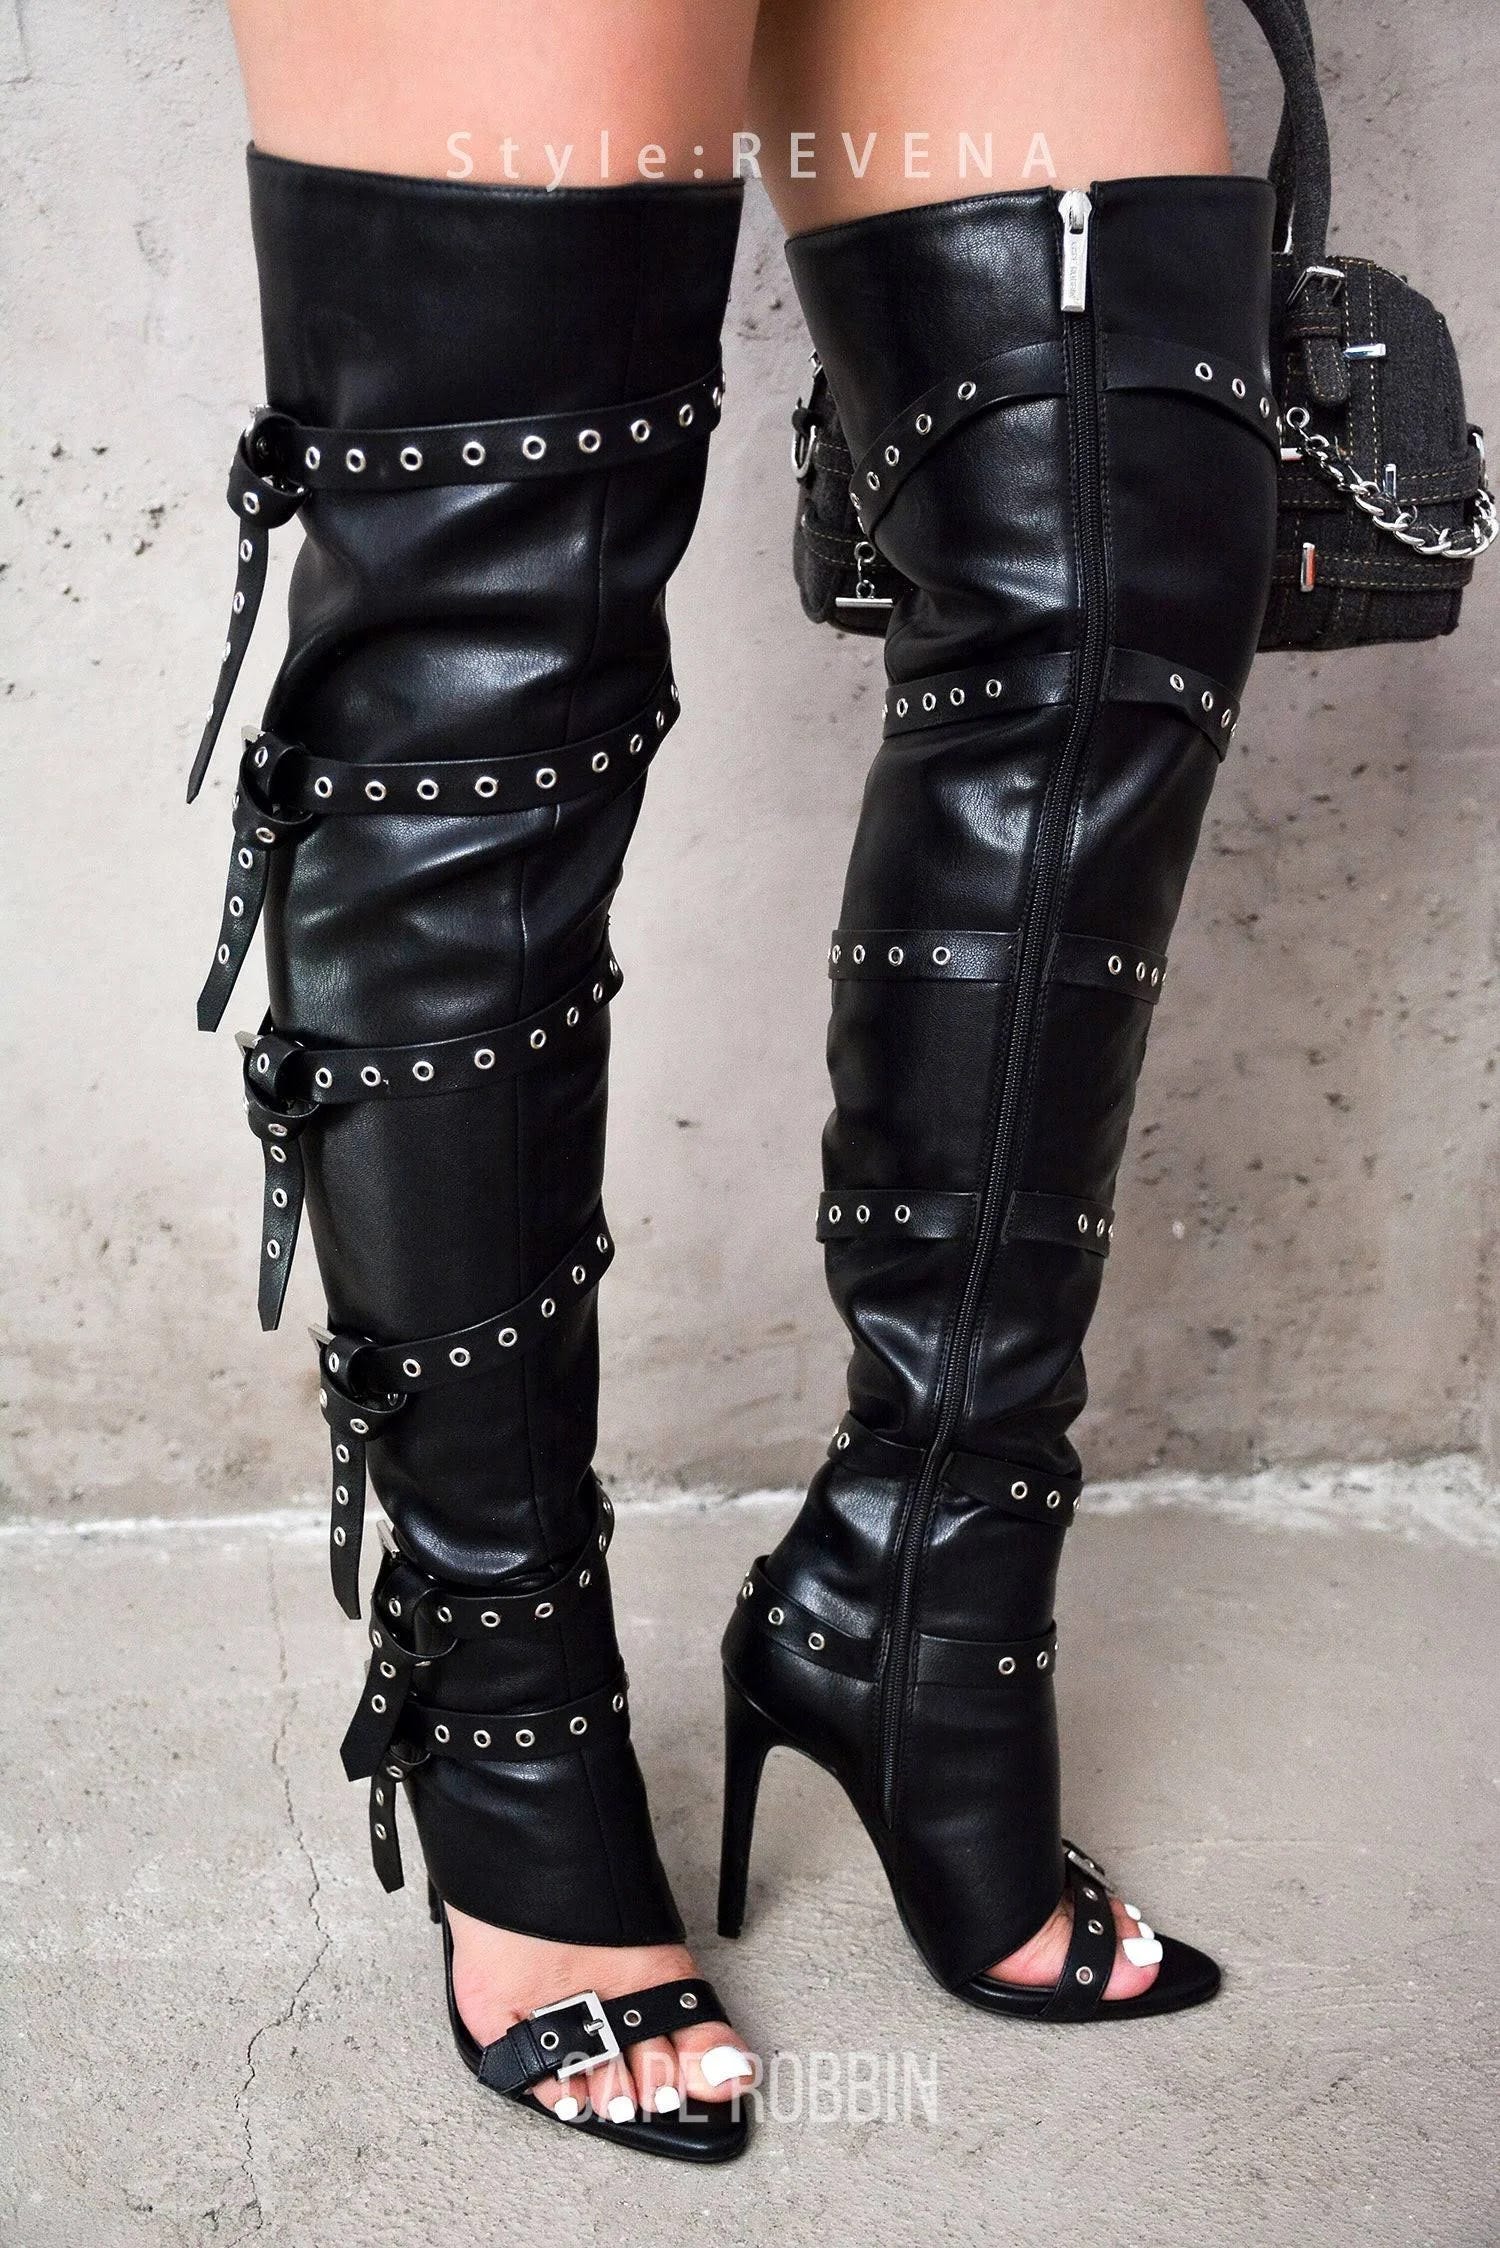 Open Toe Thigh-High Boots: Cape Robbin's Revena Style | Image